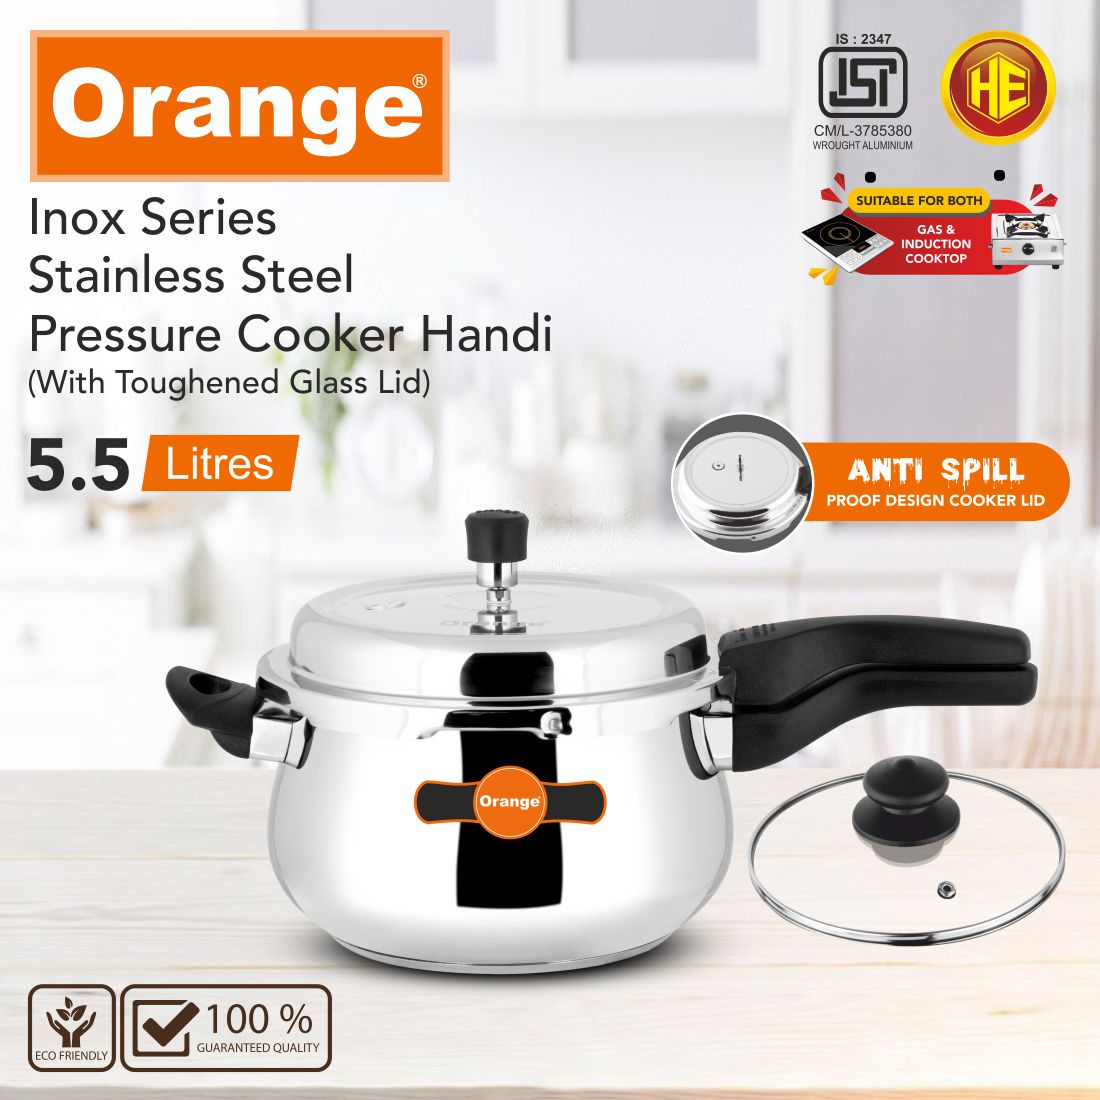 Orange Inox Series Stainless Steel Outer Lid Pressure Cooker Handi With Toughened Glass Lid